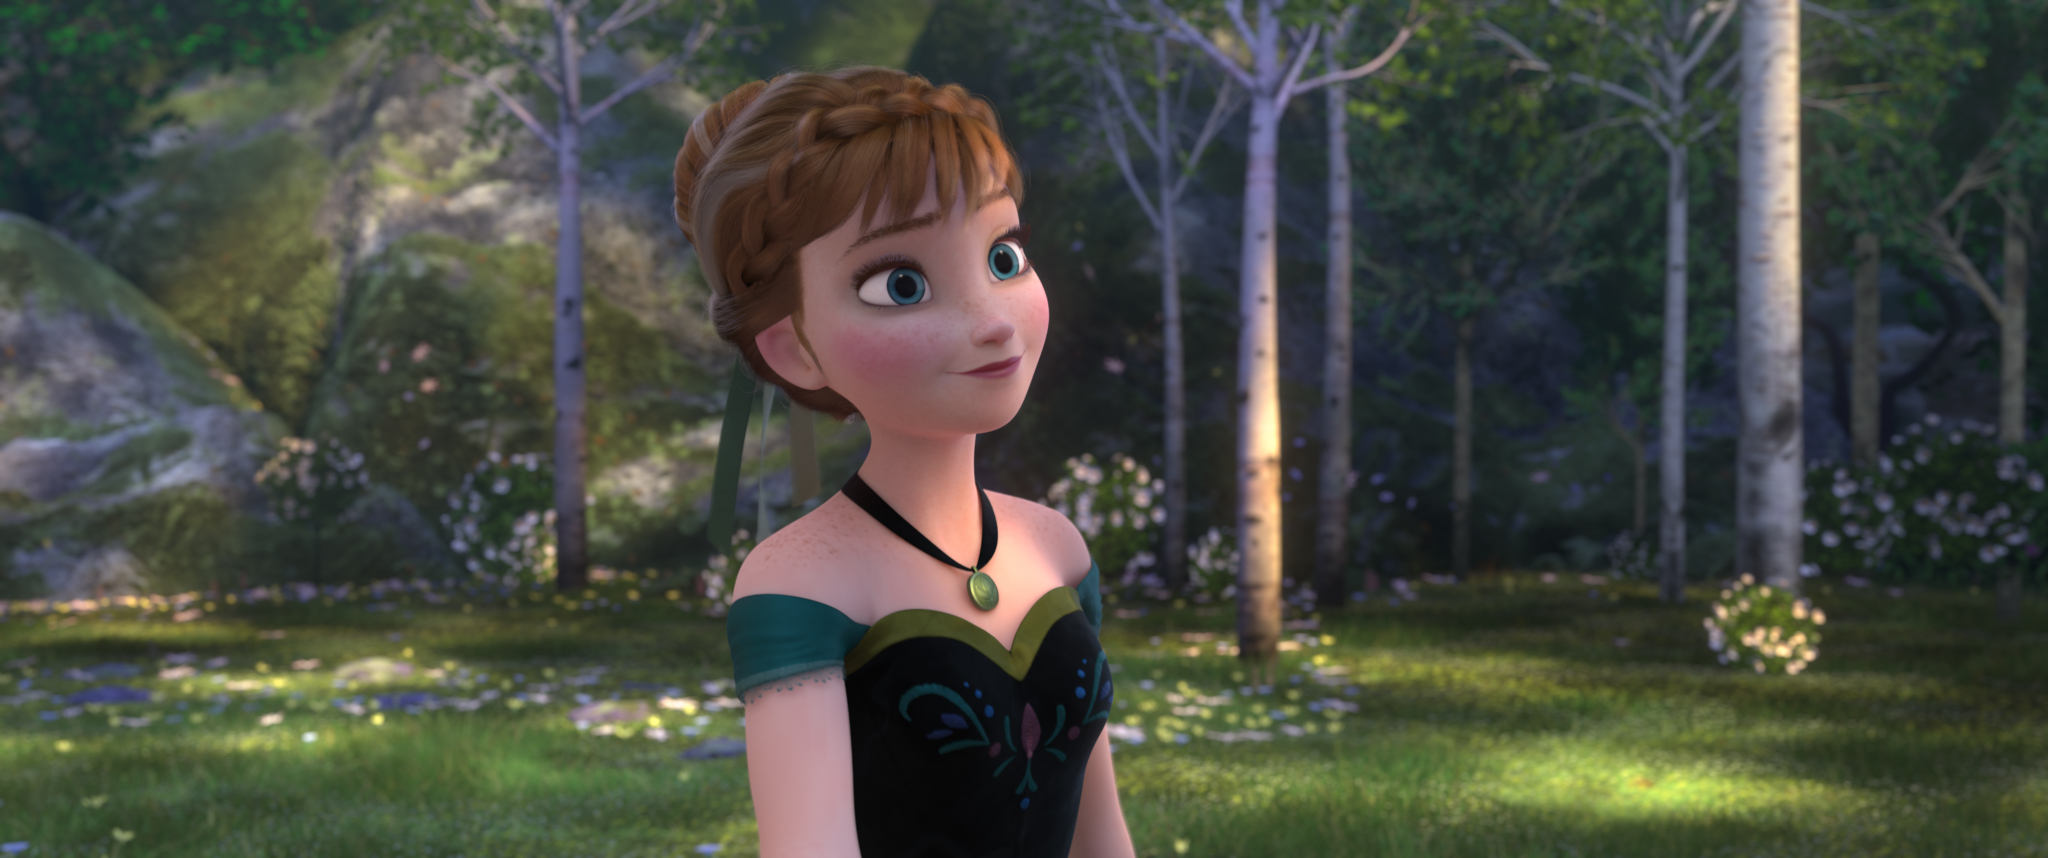 The Best Songs in the Frozen Movie